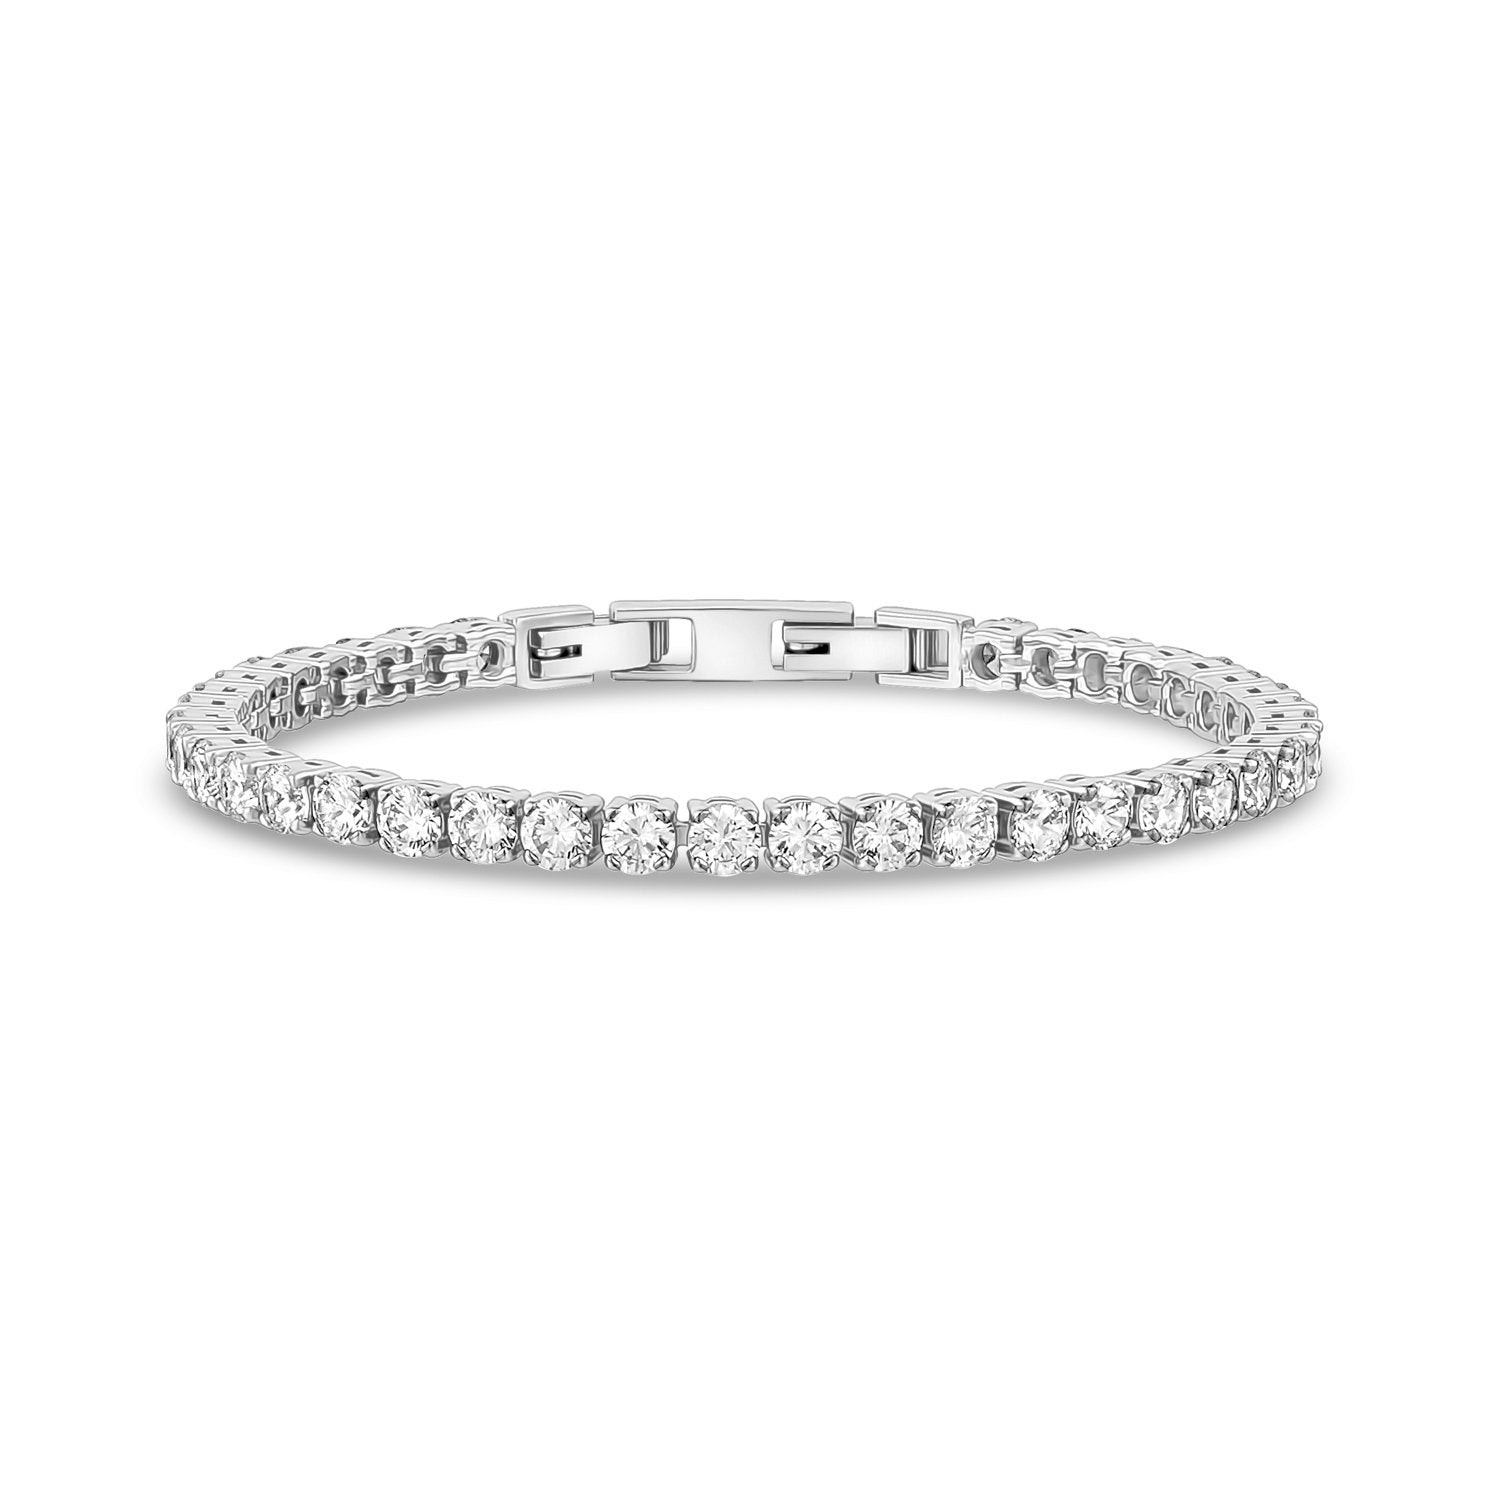 Shop Diamond Tennis Bracelet Gifts | With Clarity